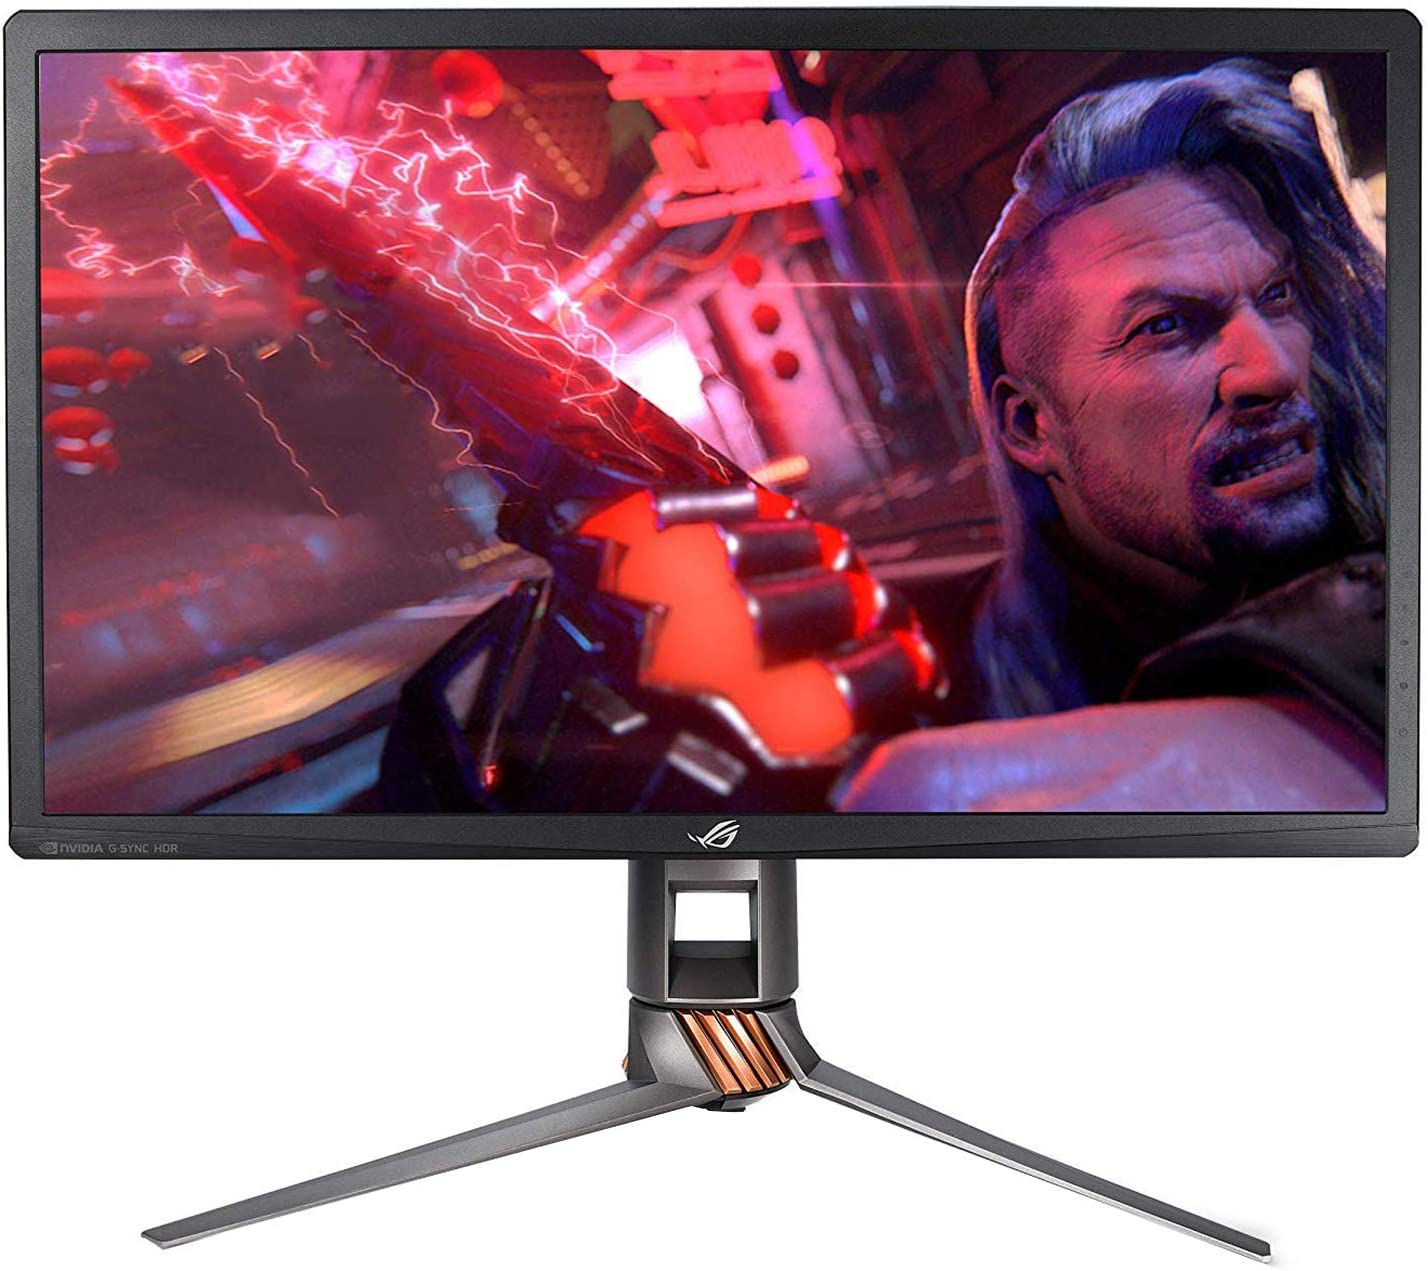 Review of the Asus ROG Swift PG27UQ